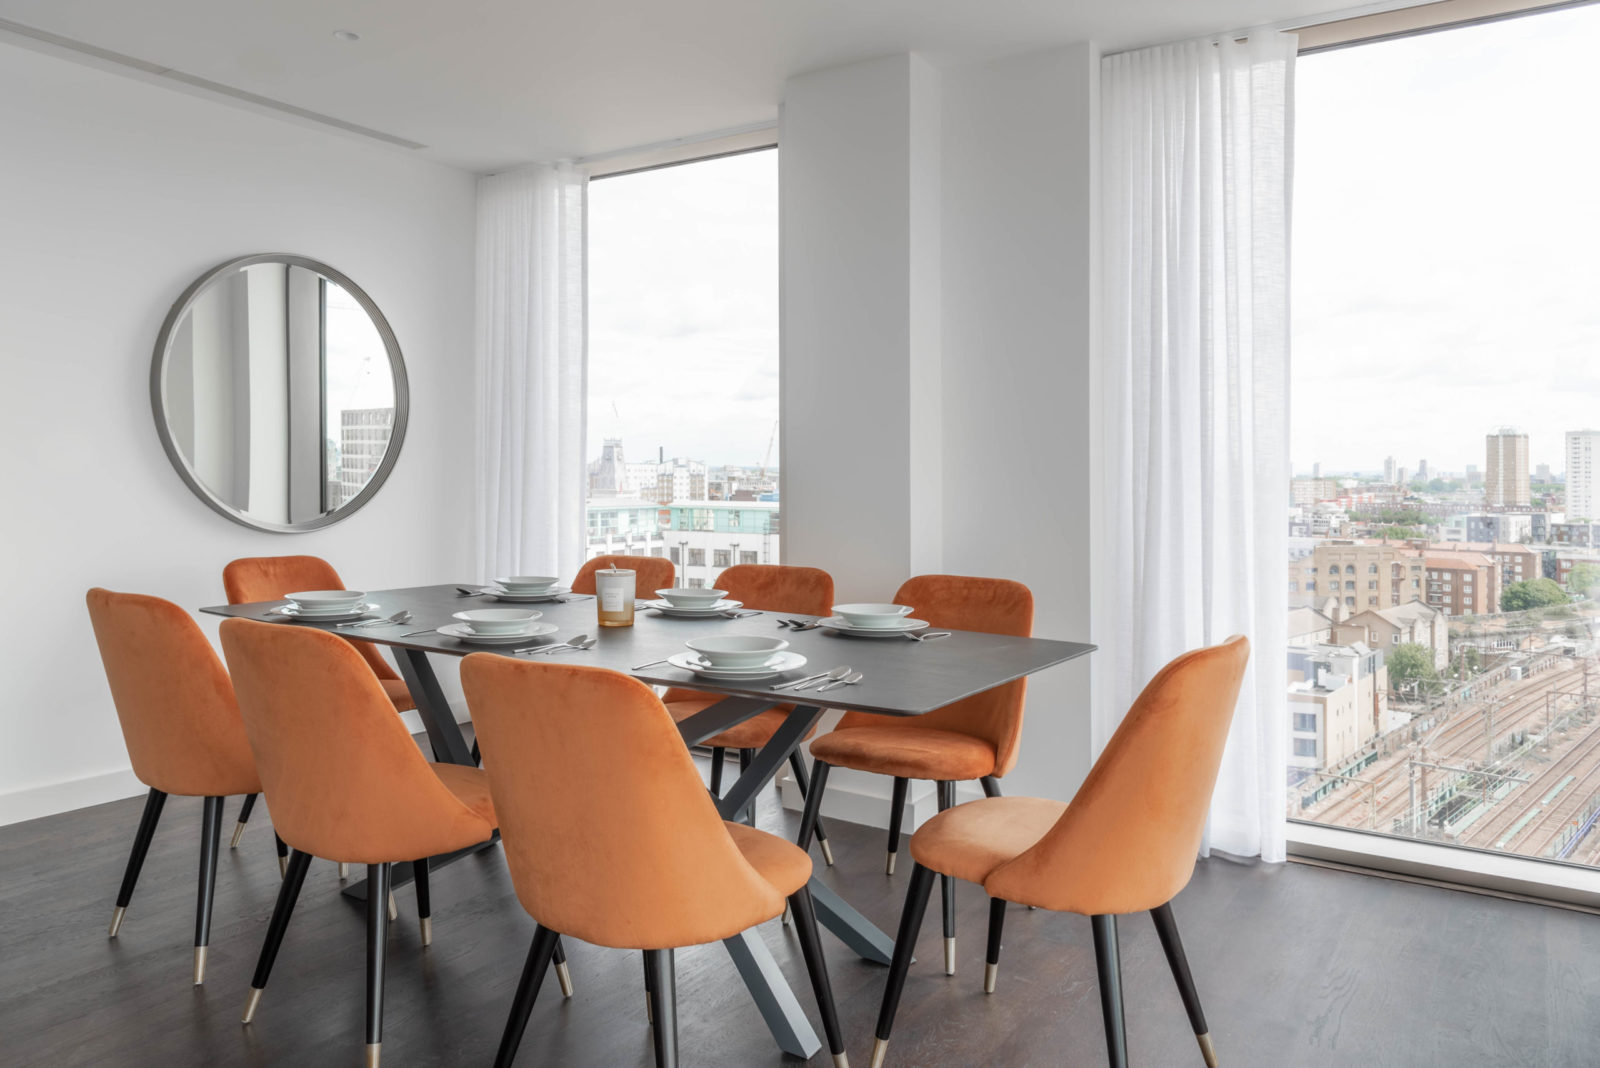 Table with orange chairs and a mirror on the wall